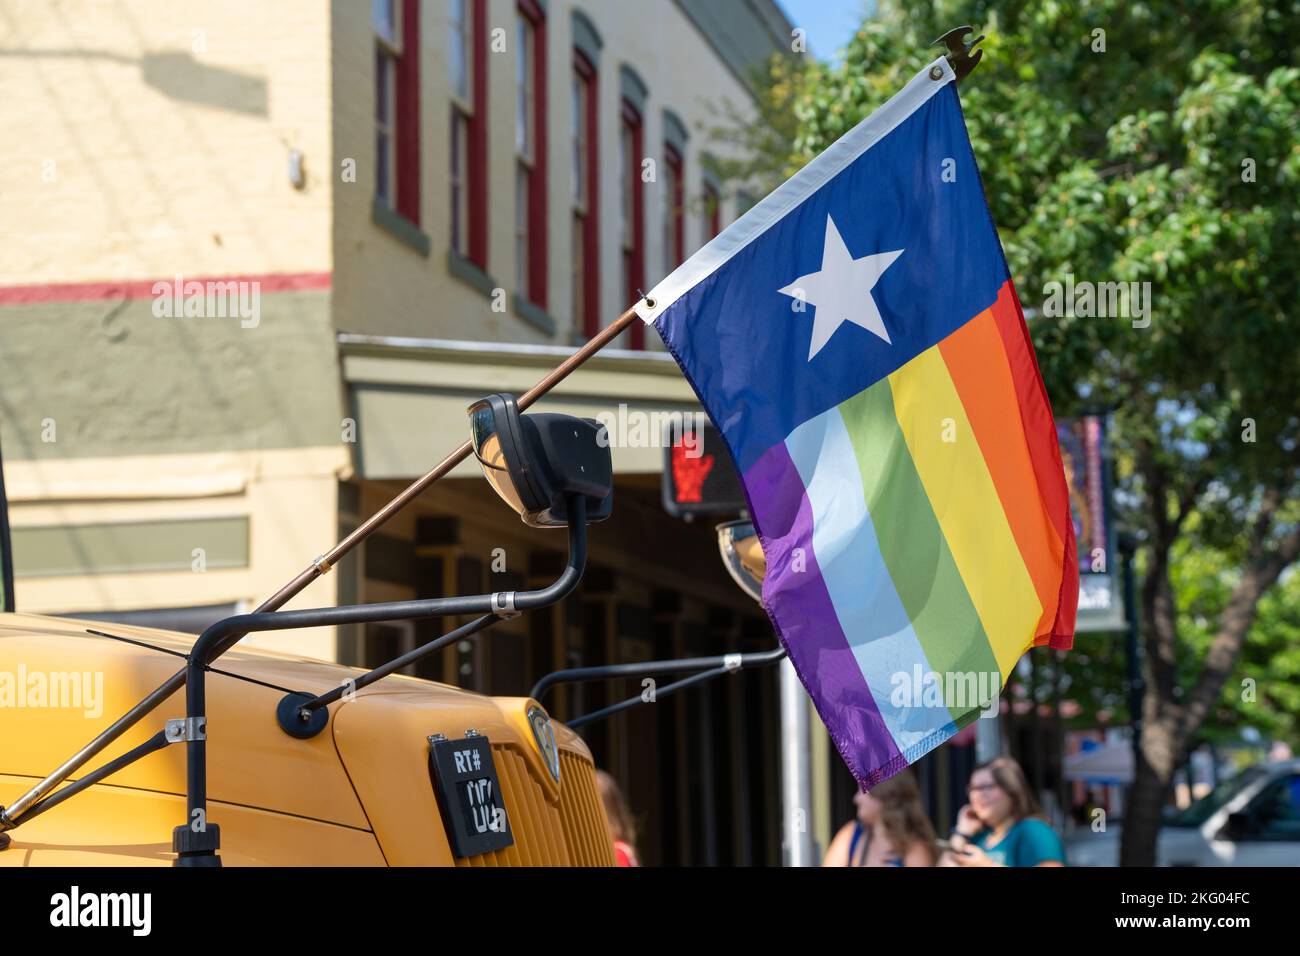 A Texas pride flag is displayed on the front of a school bus during the San Marcos Pride anti-bully parade. Stock Photo